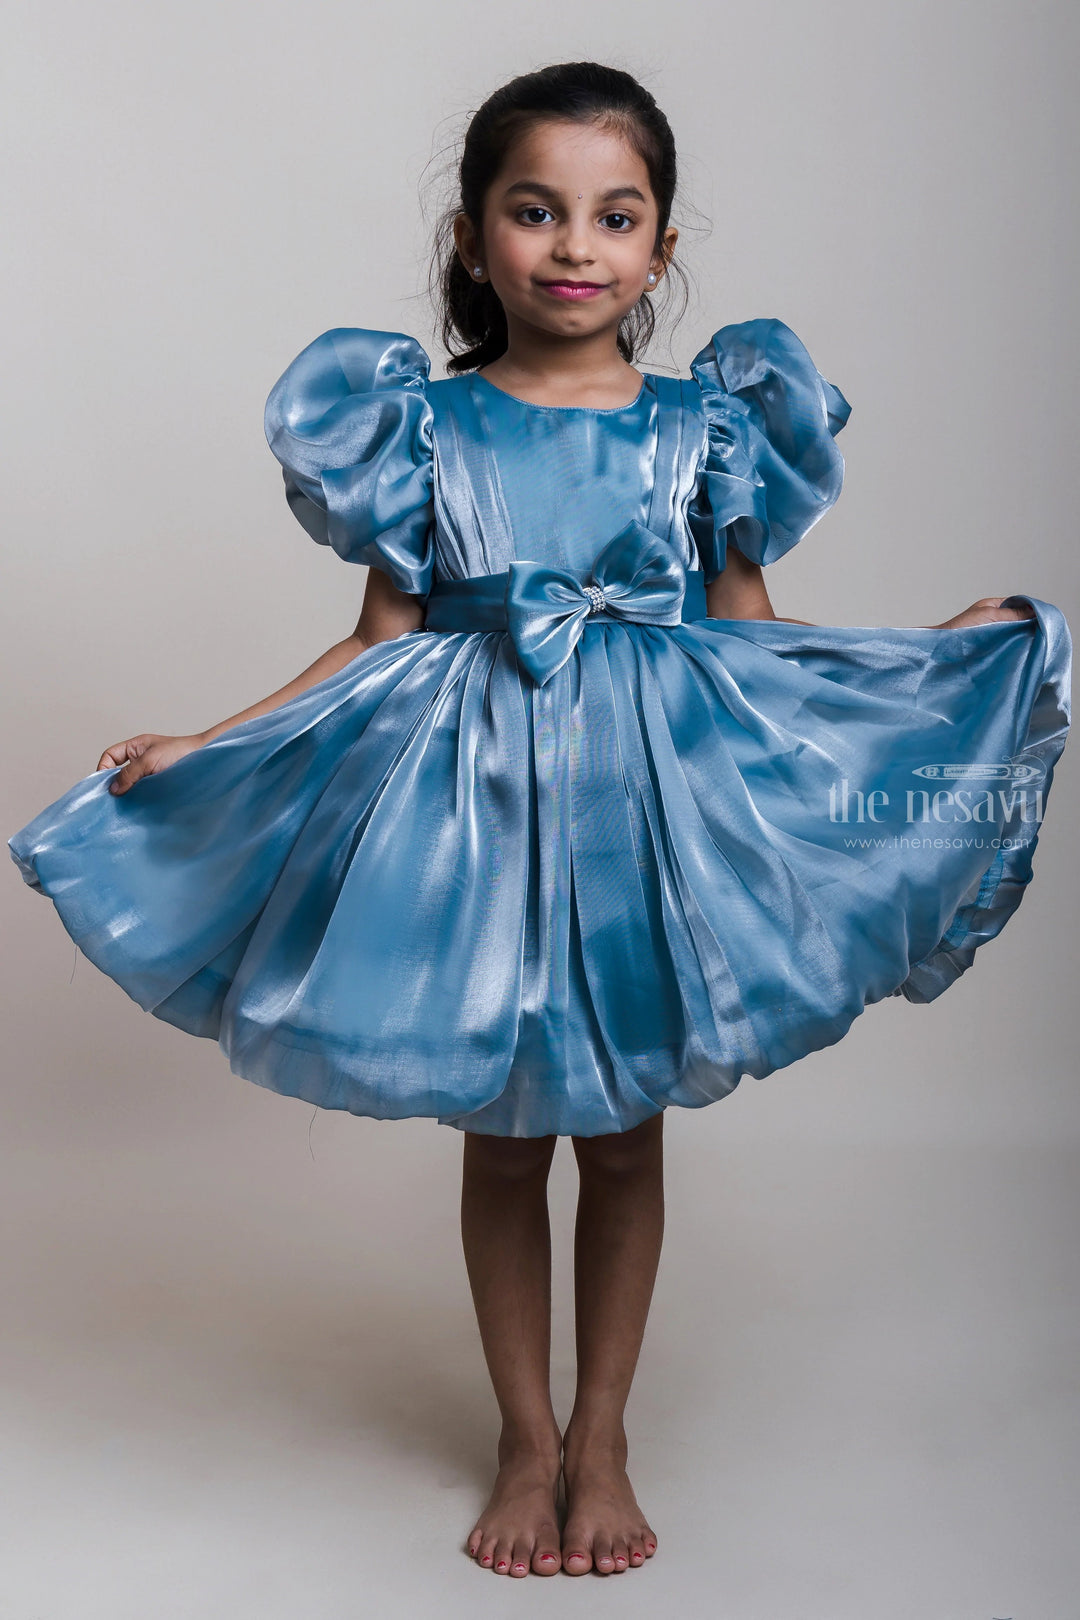 The Nesavu Party Frock Soft Organza Grey Frock With Bow Embellishment For Girls Nesavu 16 (1Y) / Gray PF103B-16 Party Wear Frocks For New Born Girls | Stylish Festive Collection | The Nesavu